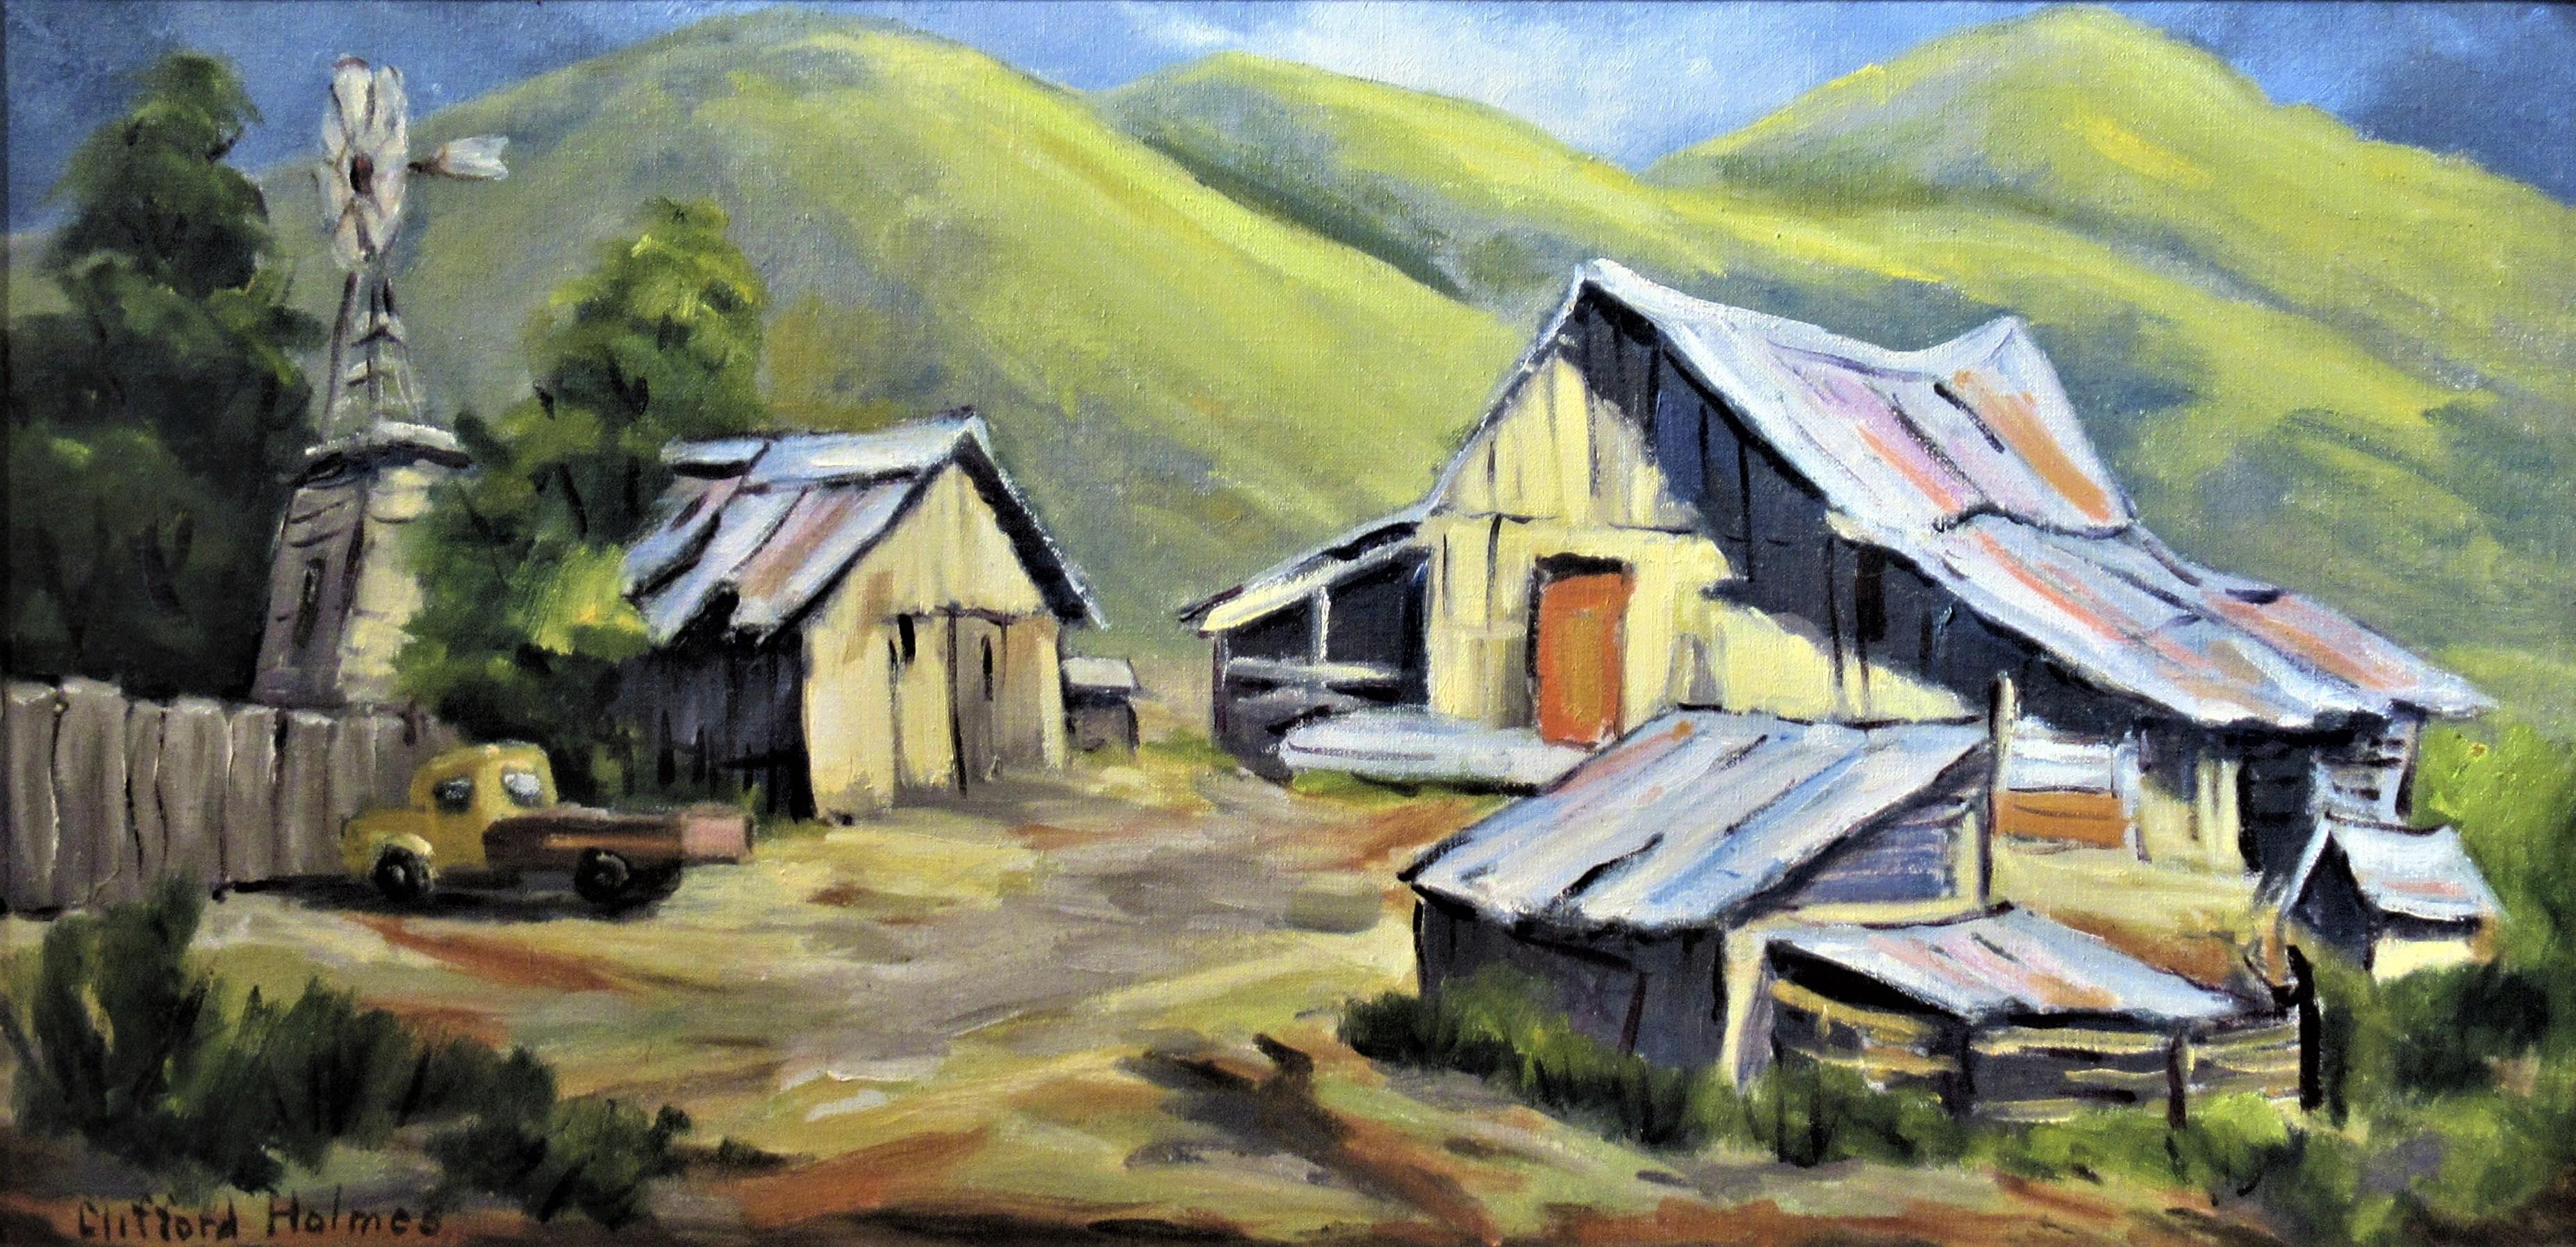 The Old Farm, California - Painting by Clifford Holmes